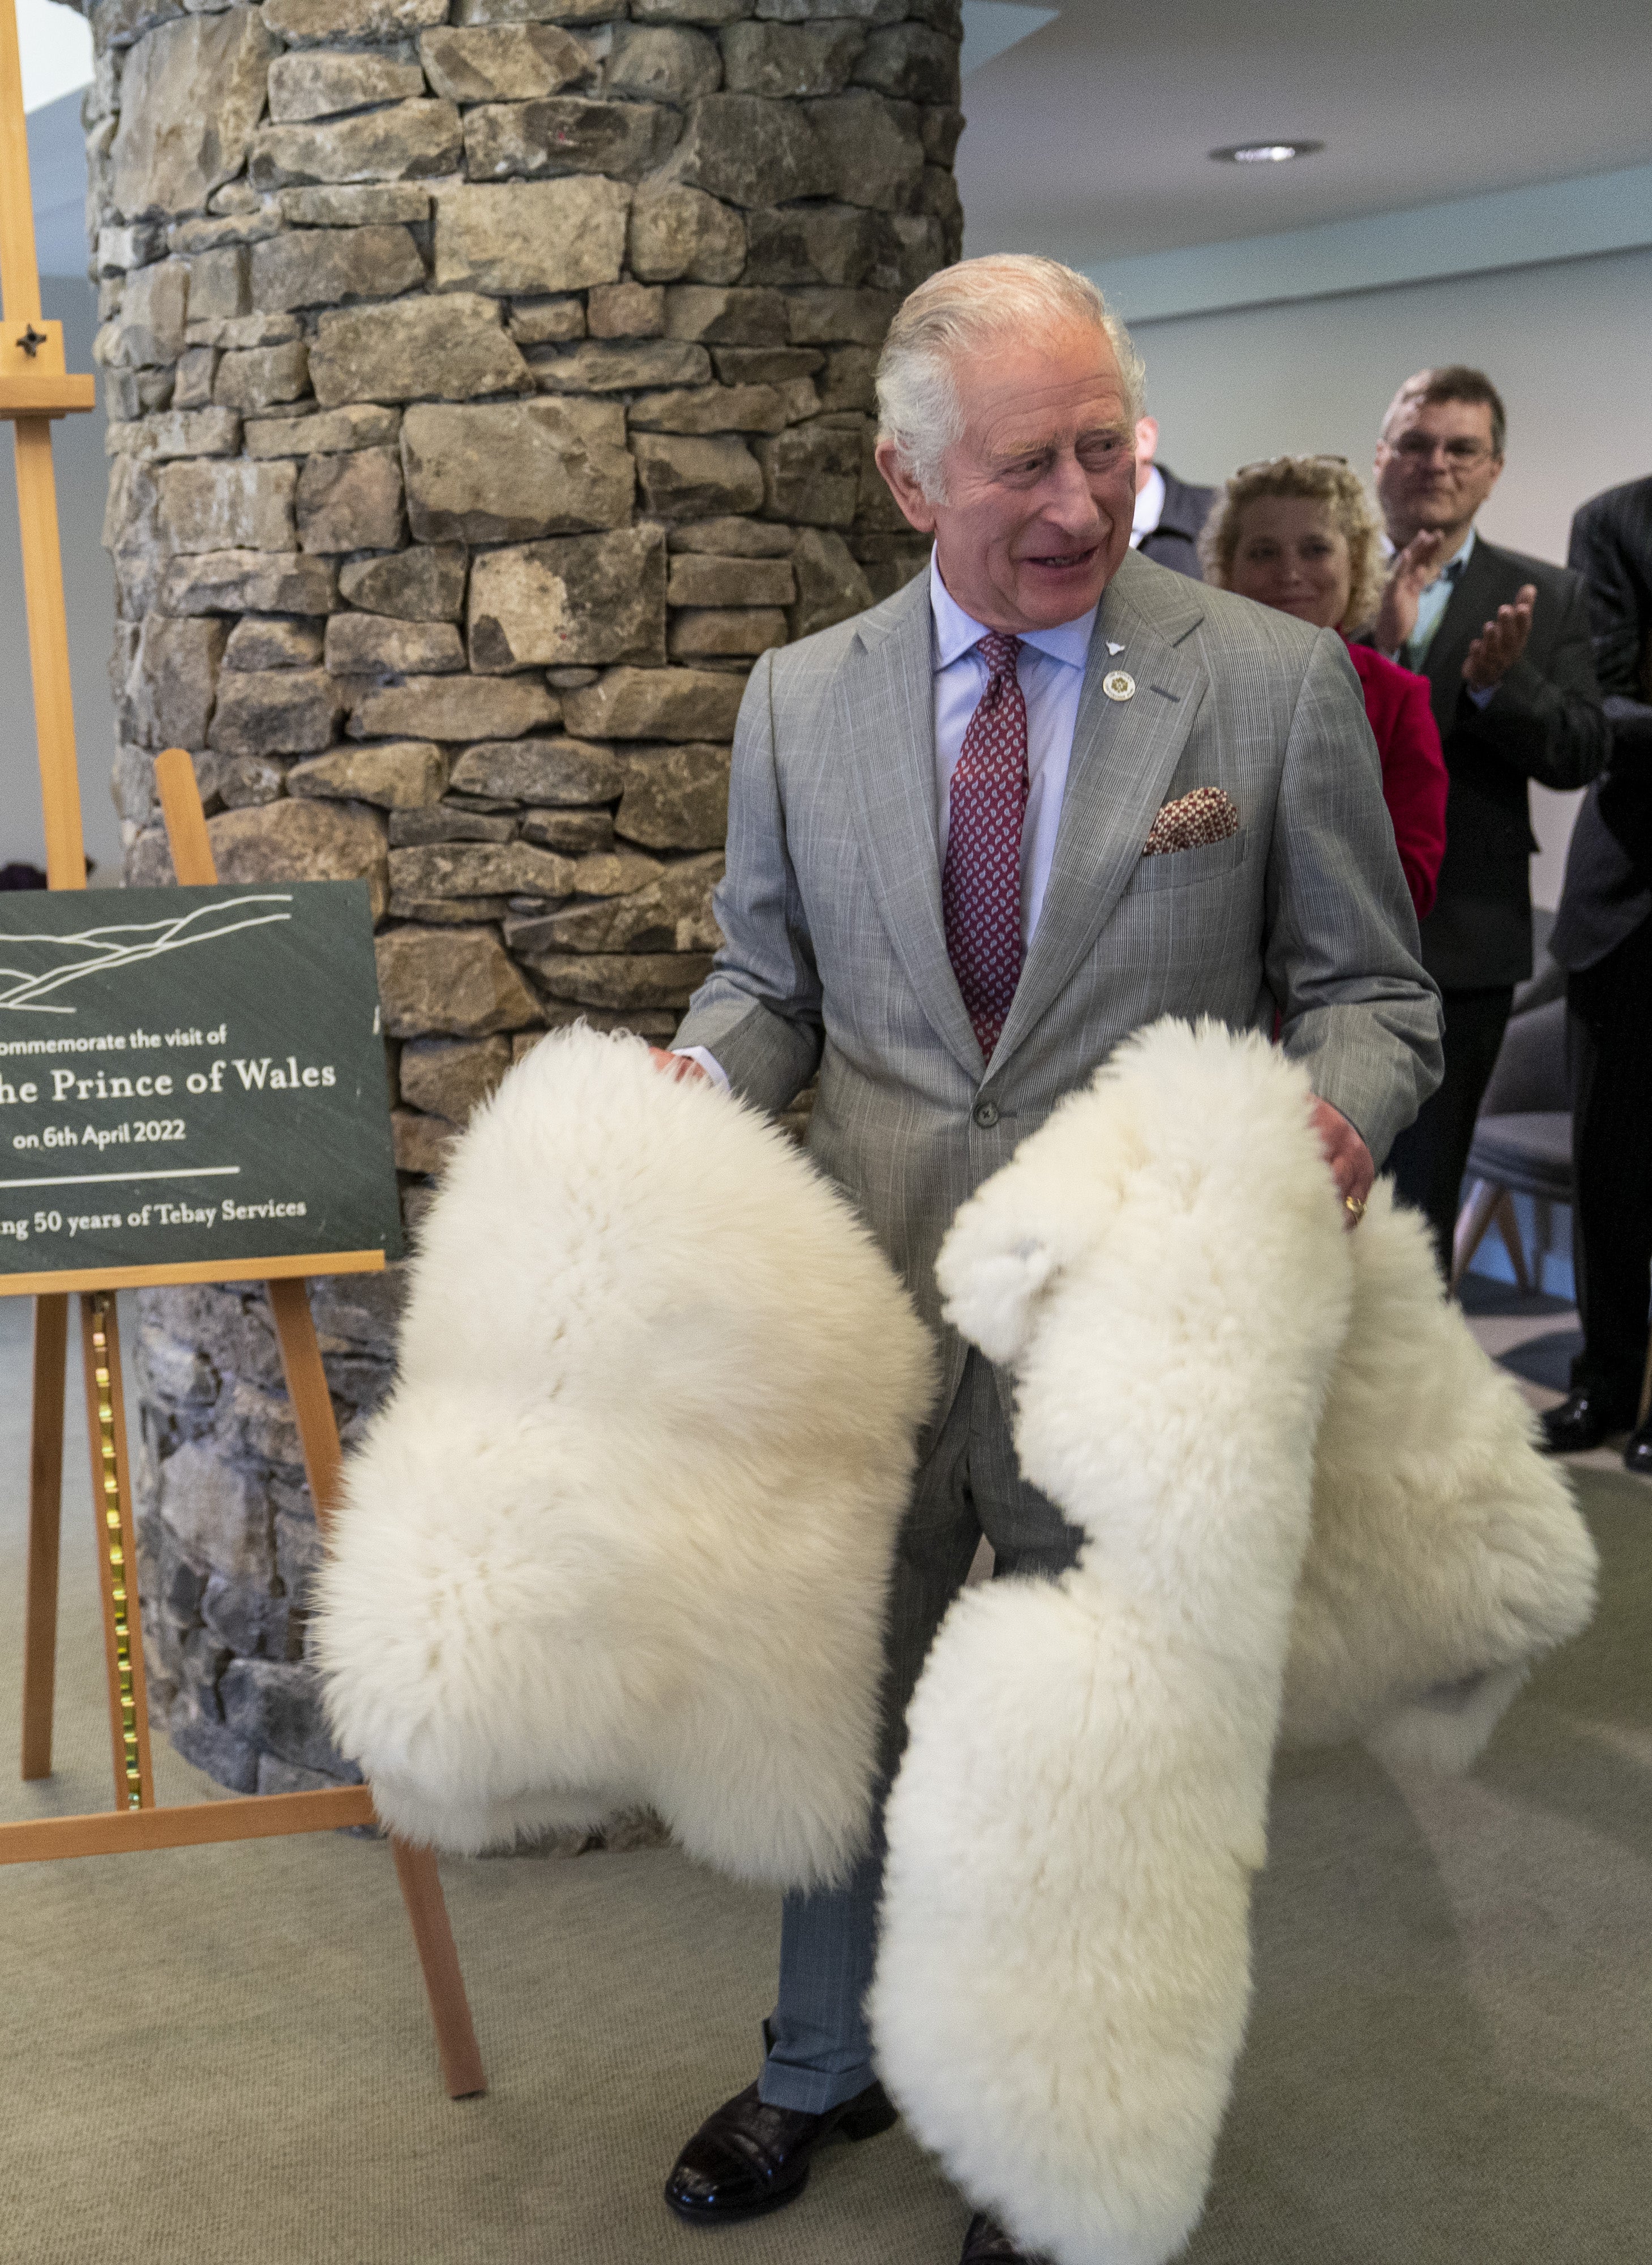 The Prince of Wales unveils a plaque during a visit to Tebay Services in Cumbria to mark its 50th anniversary (Arthur Edwards/The Sun/PA)